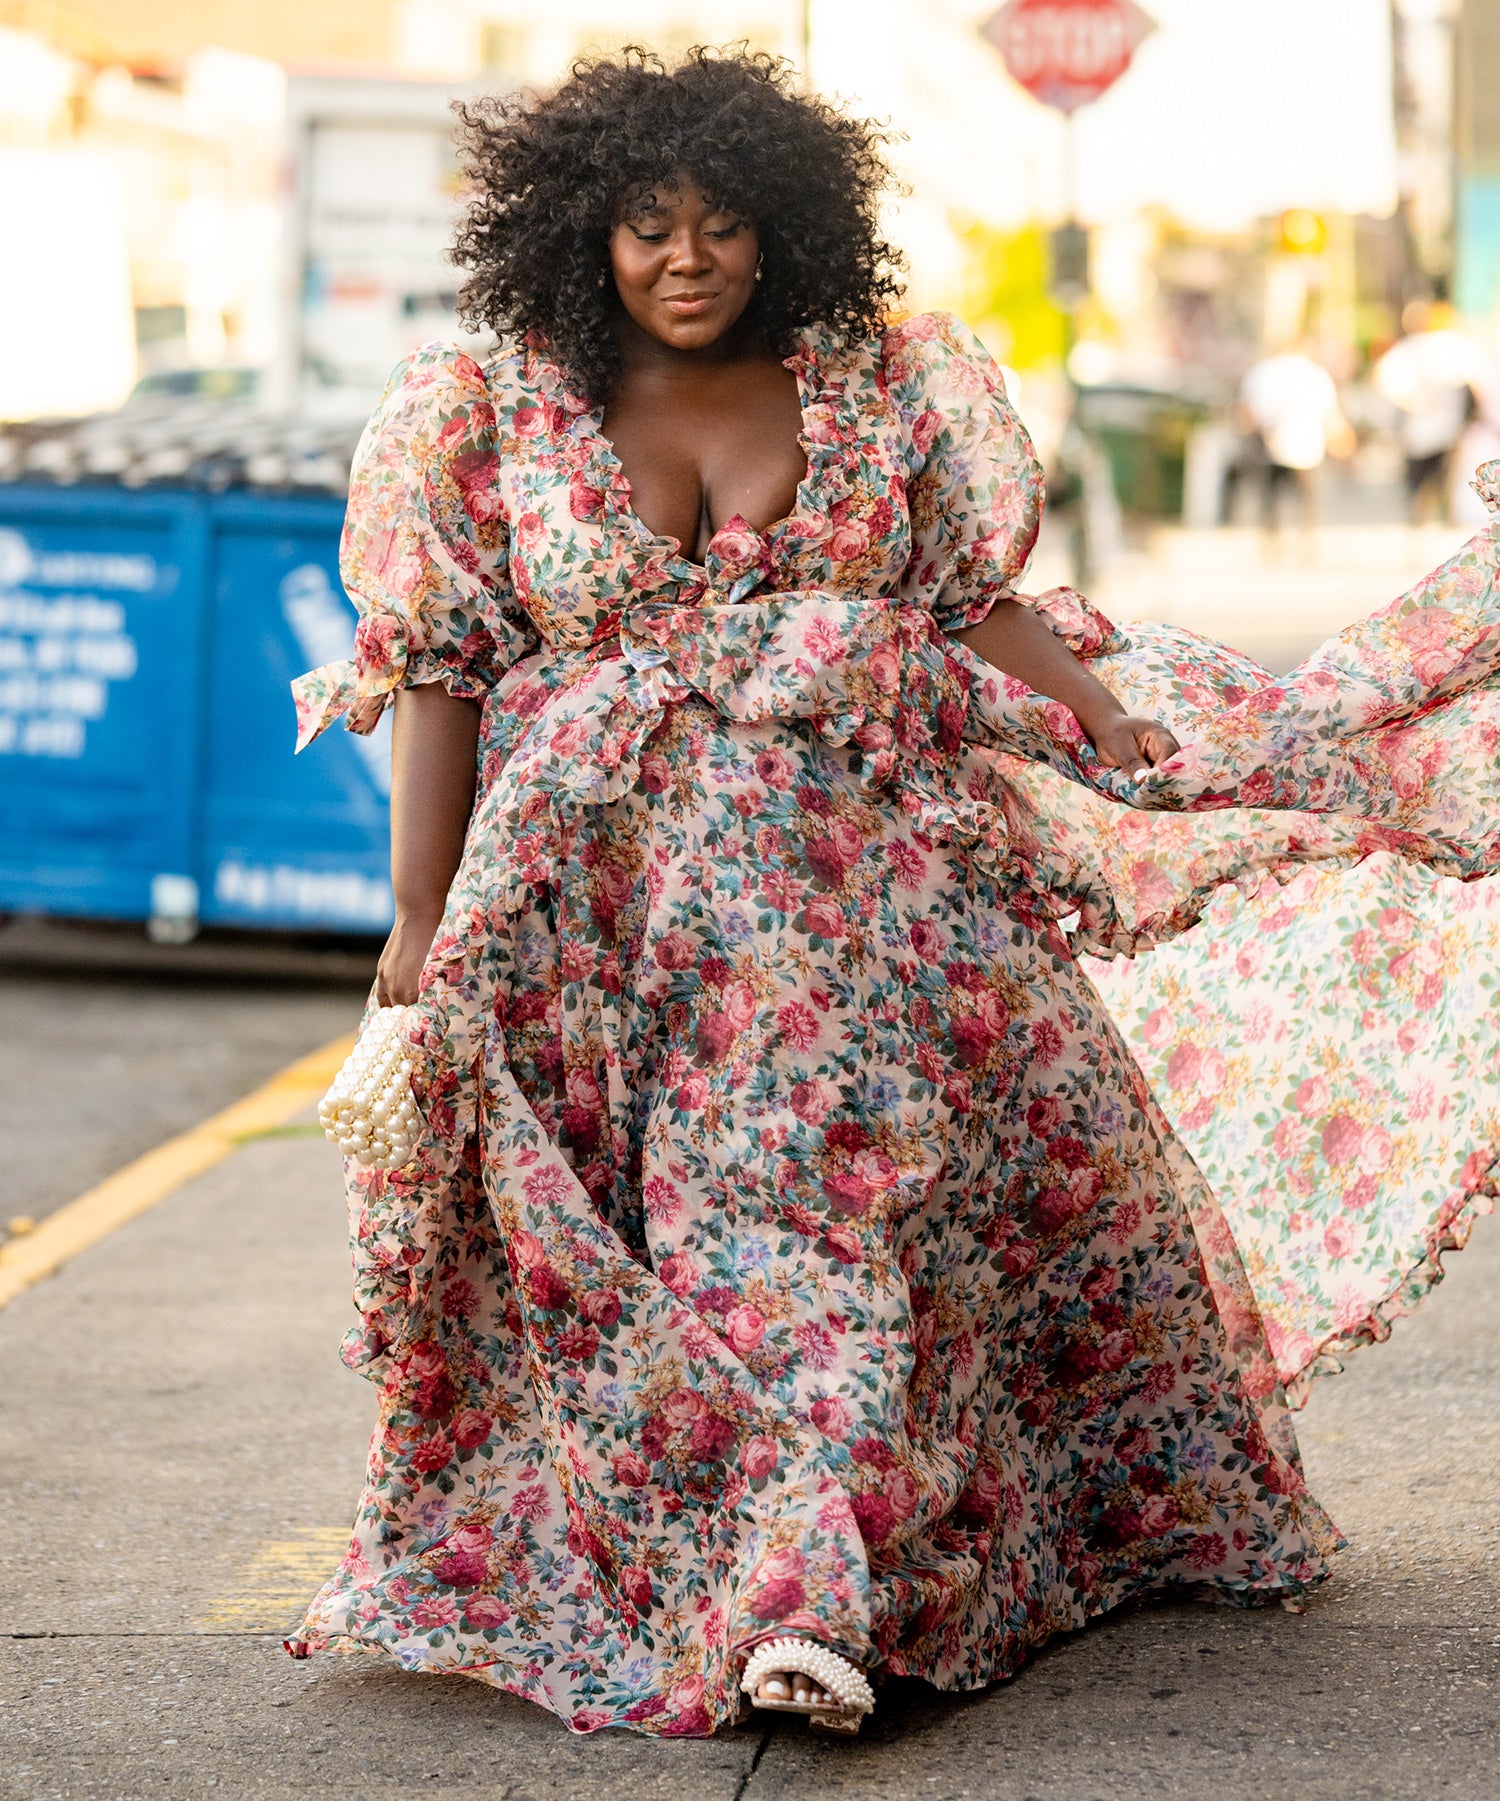 Street Style Has A Fatphobia Problem. Can It Be Fixed?